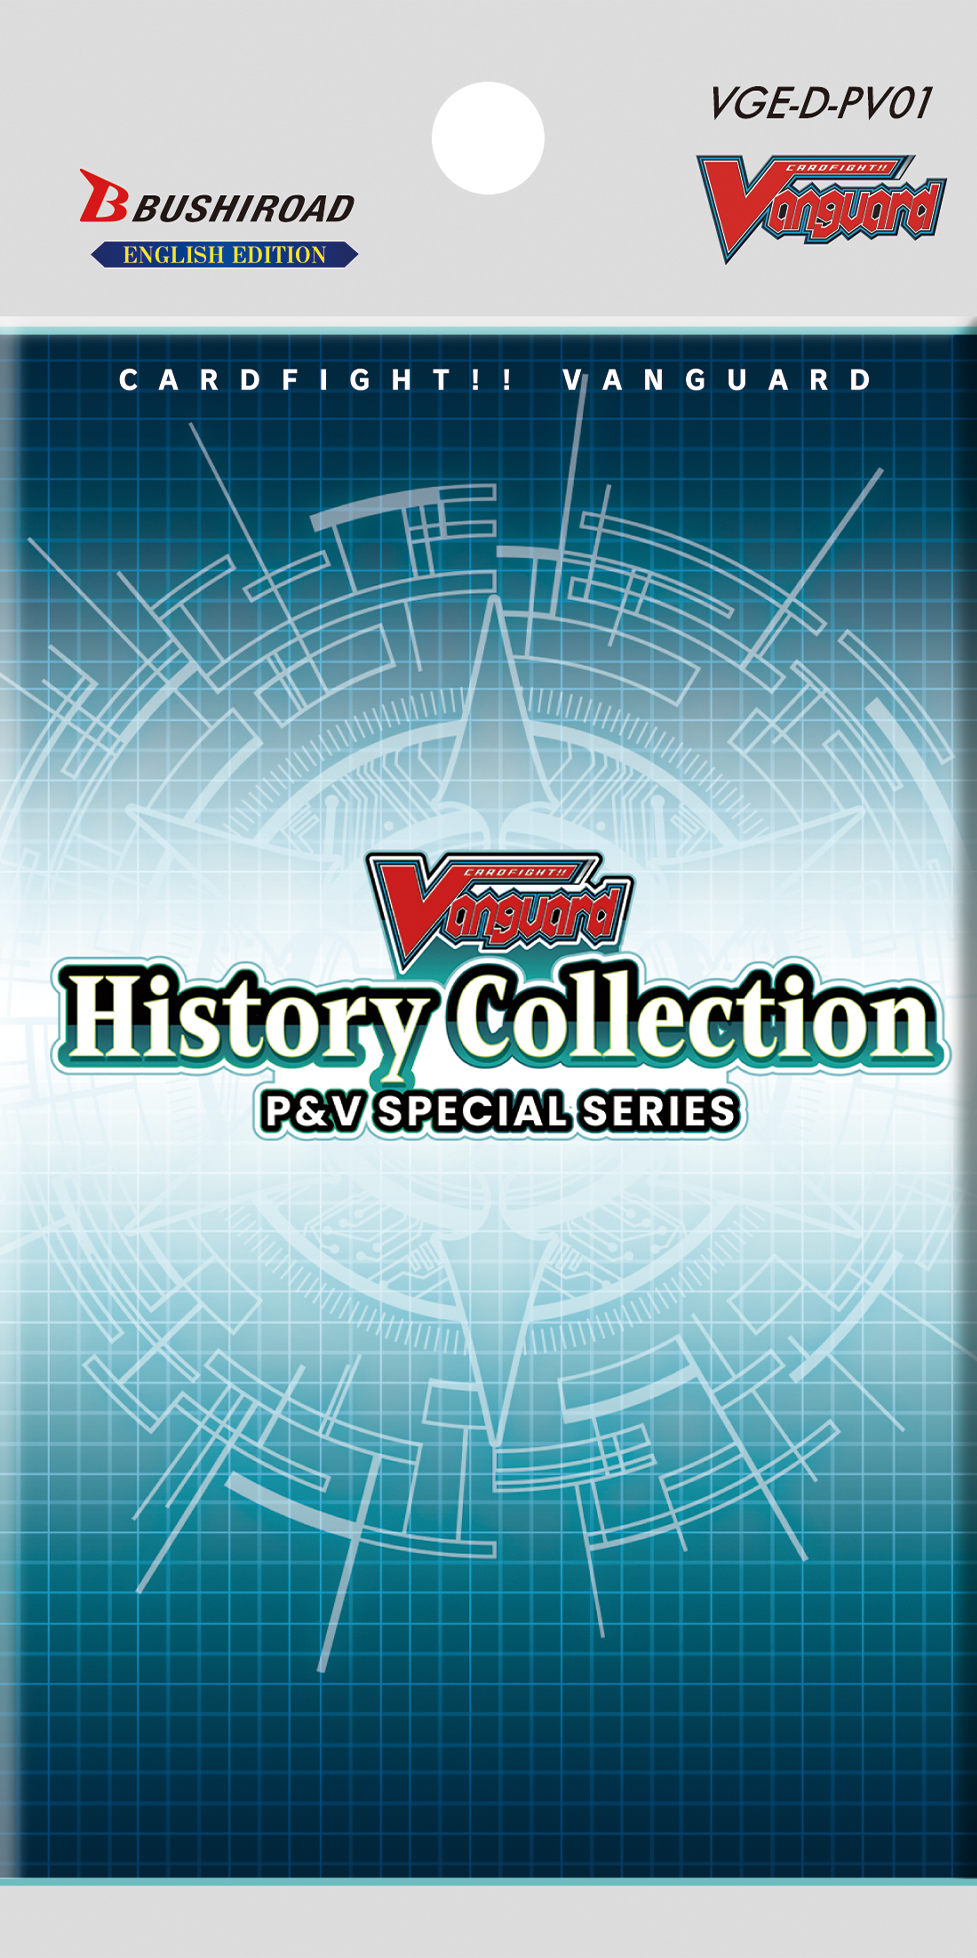 Cardfight!! Vanguard - P & V Special Series: History Collection